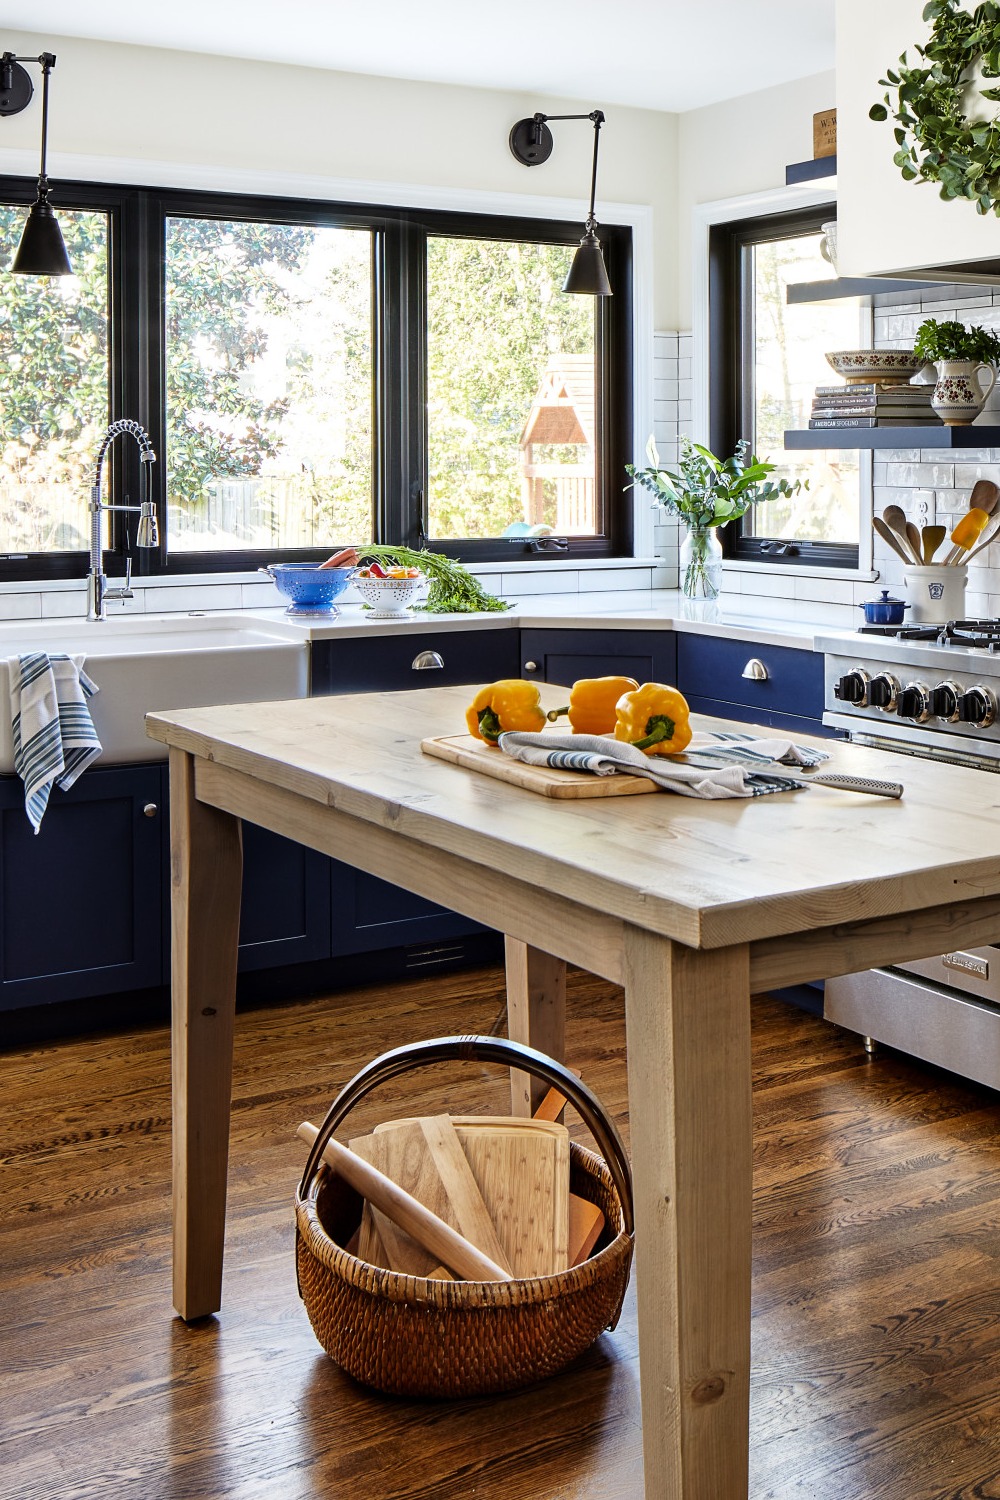 Dining Table Small Kitchen Ideas Farm Sink Blue Cabinets White Subway Tiles Kitchen With Window